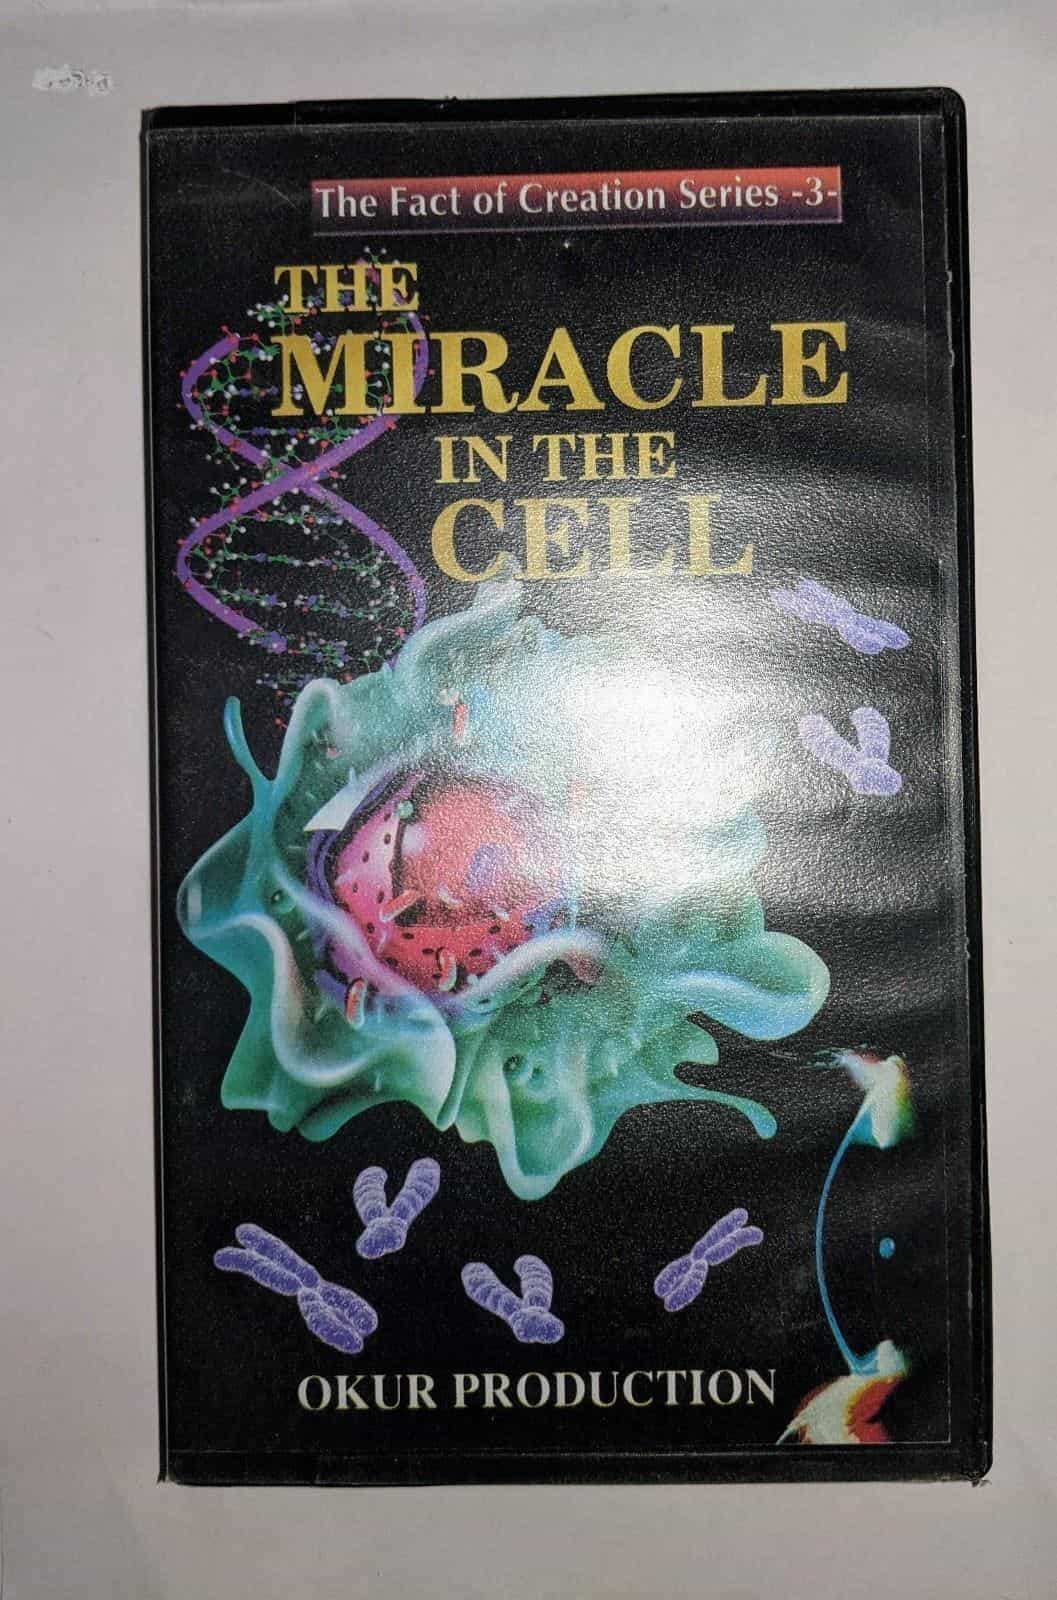 The Miracle In The Cell Educational VHS Tape